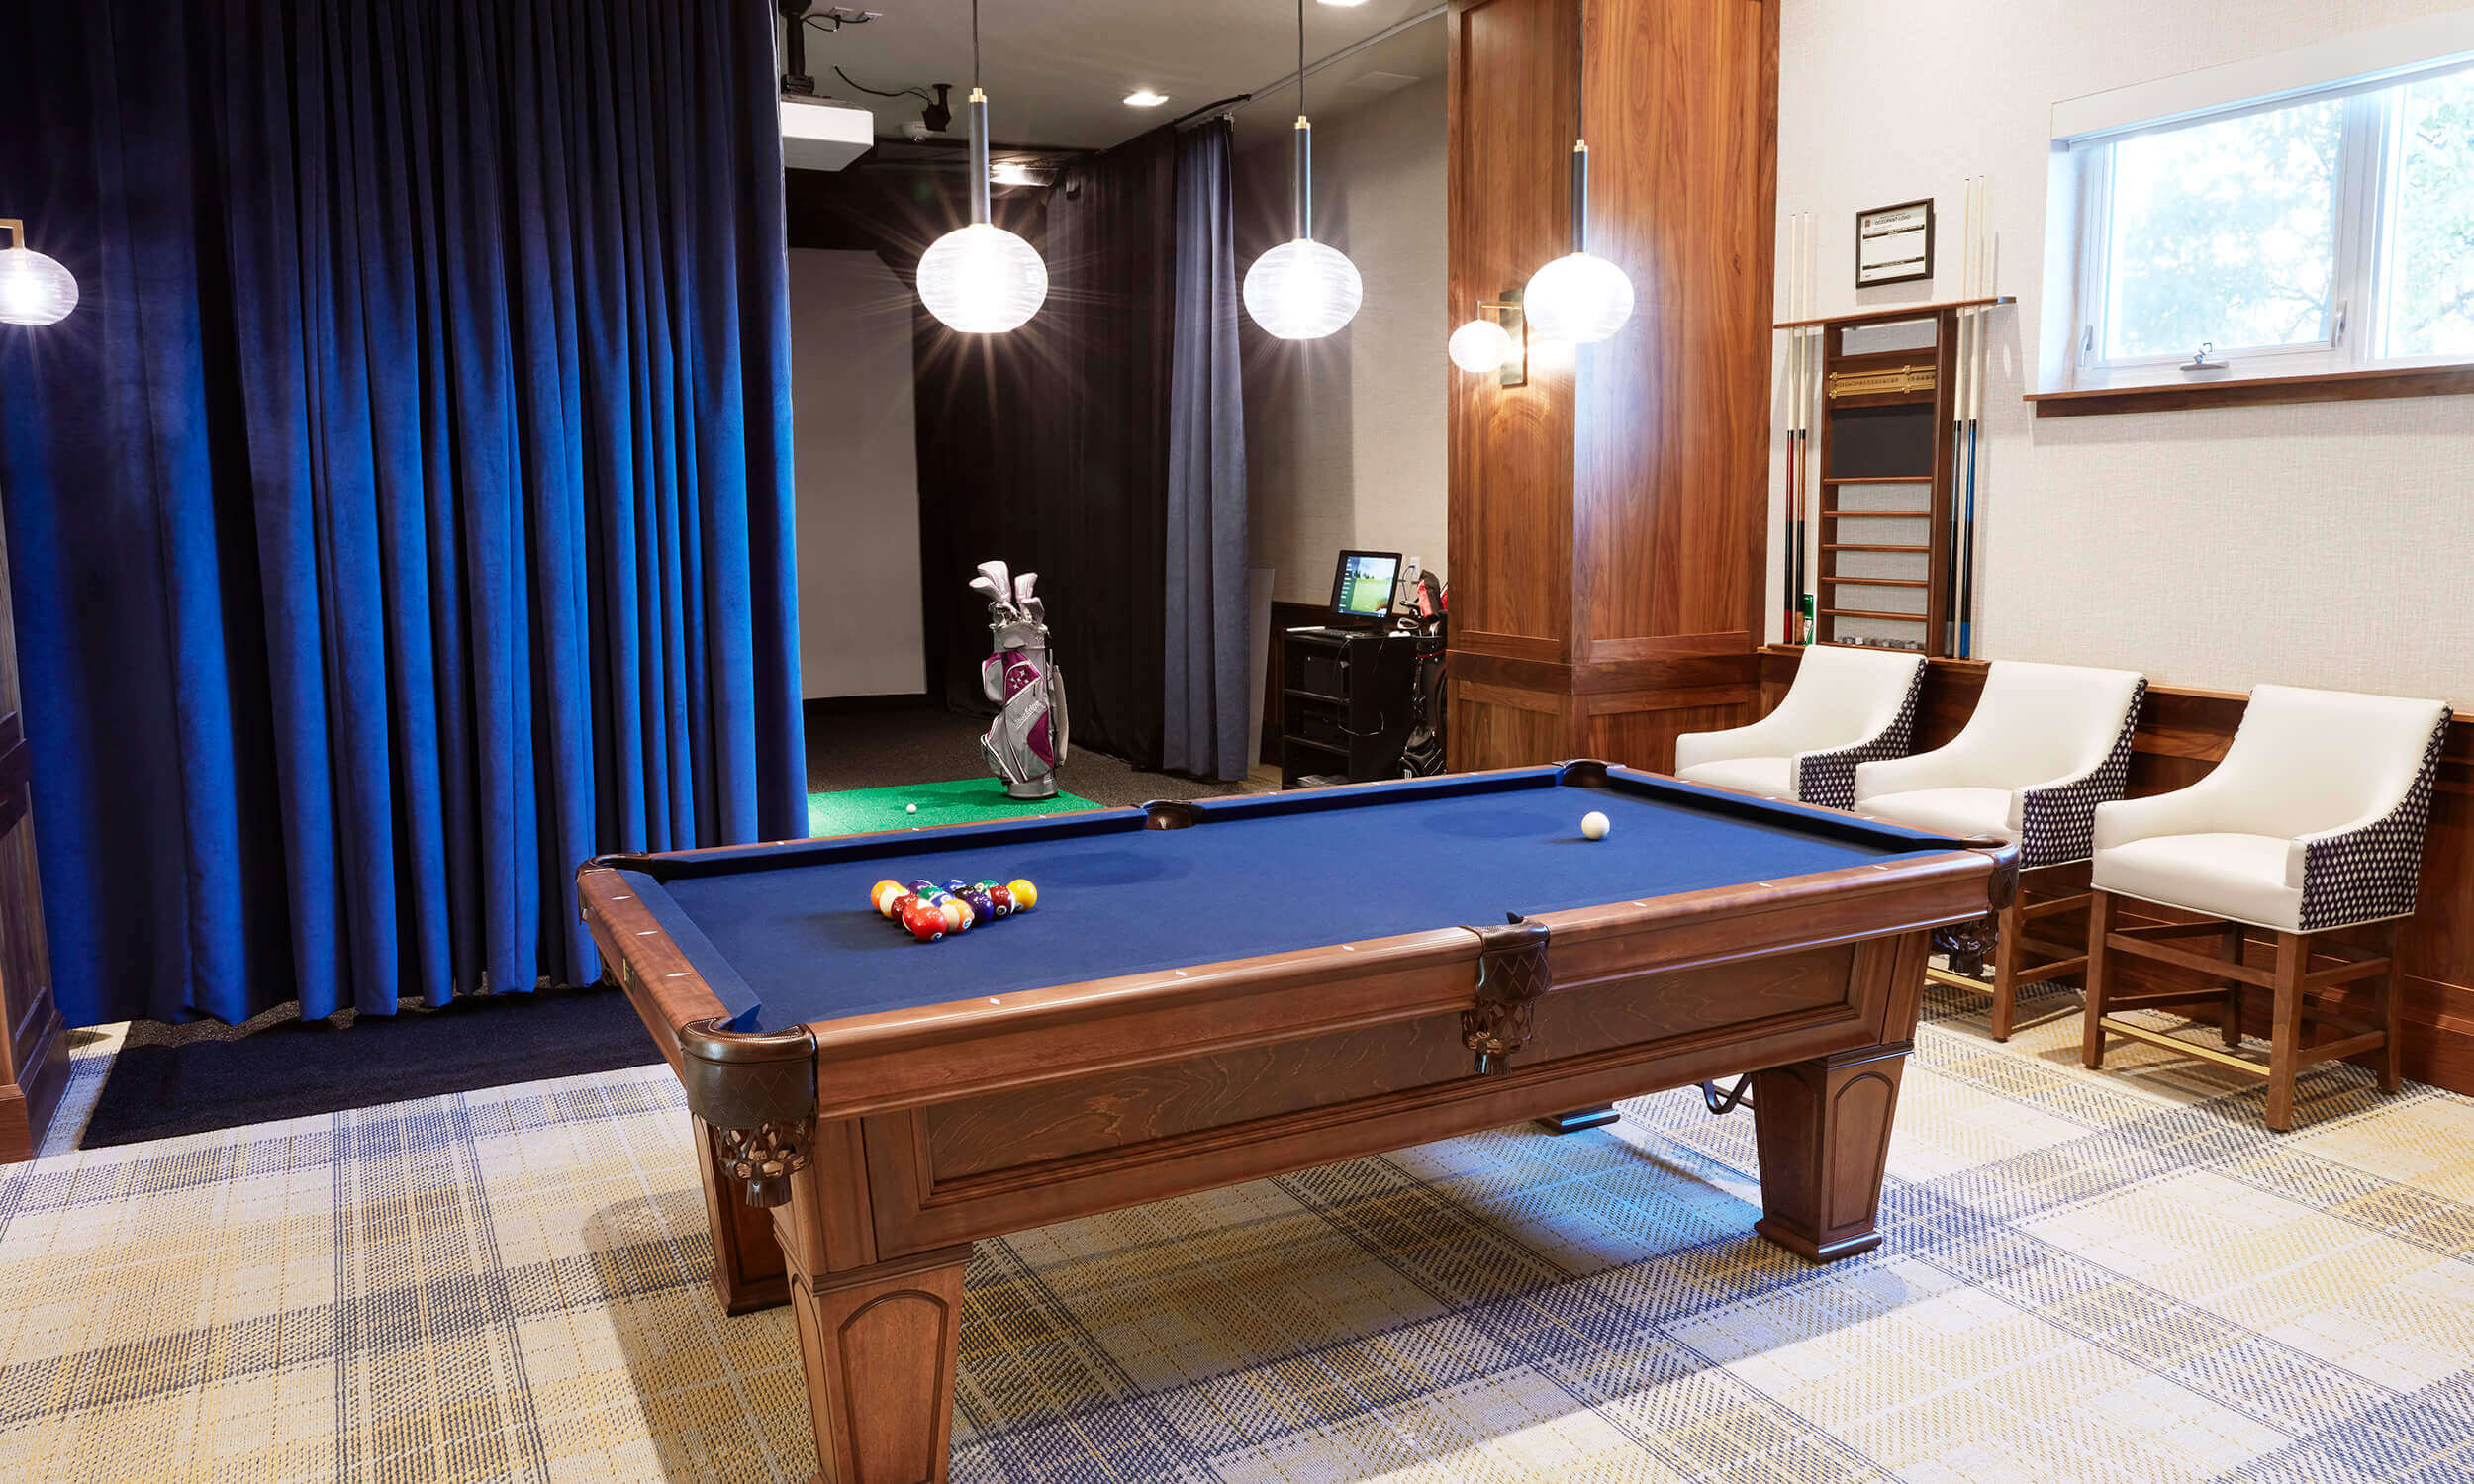 Room with pool table in front of navy curtains and beside three cushioned chairs